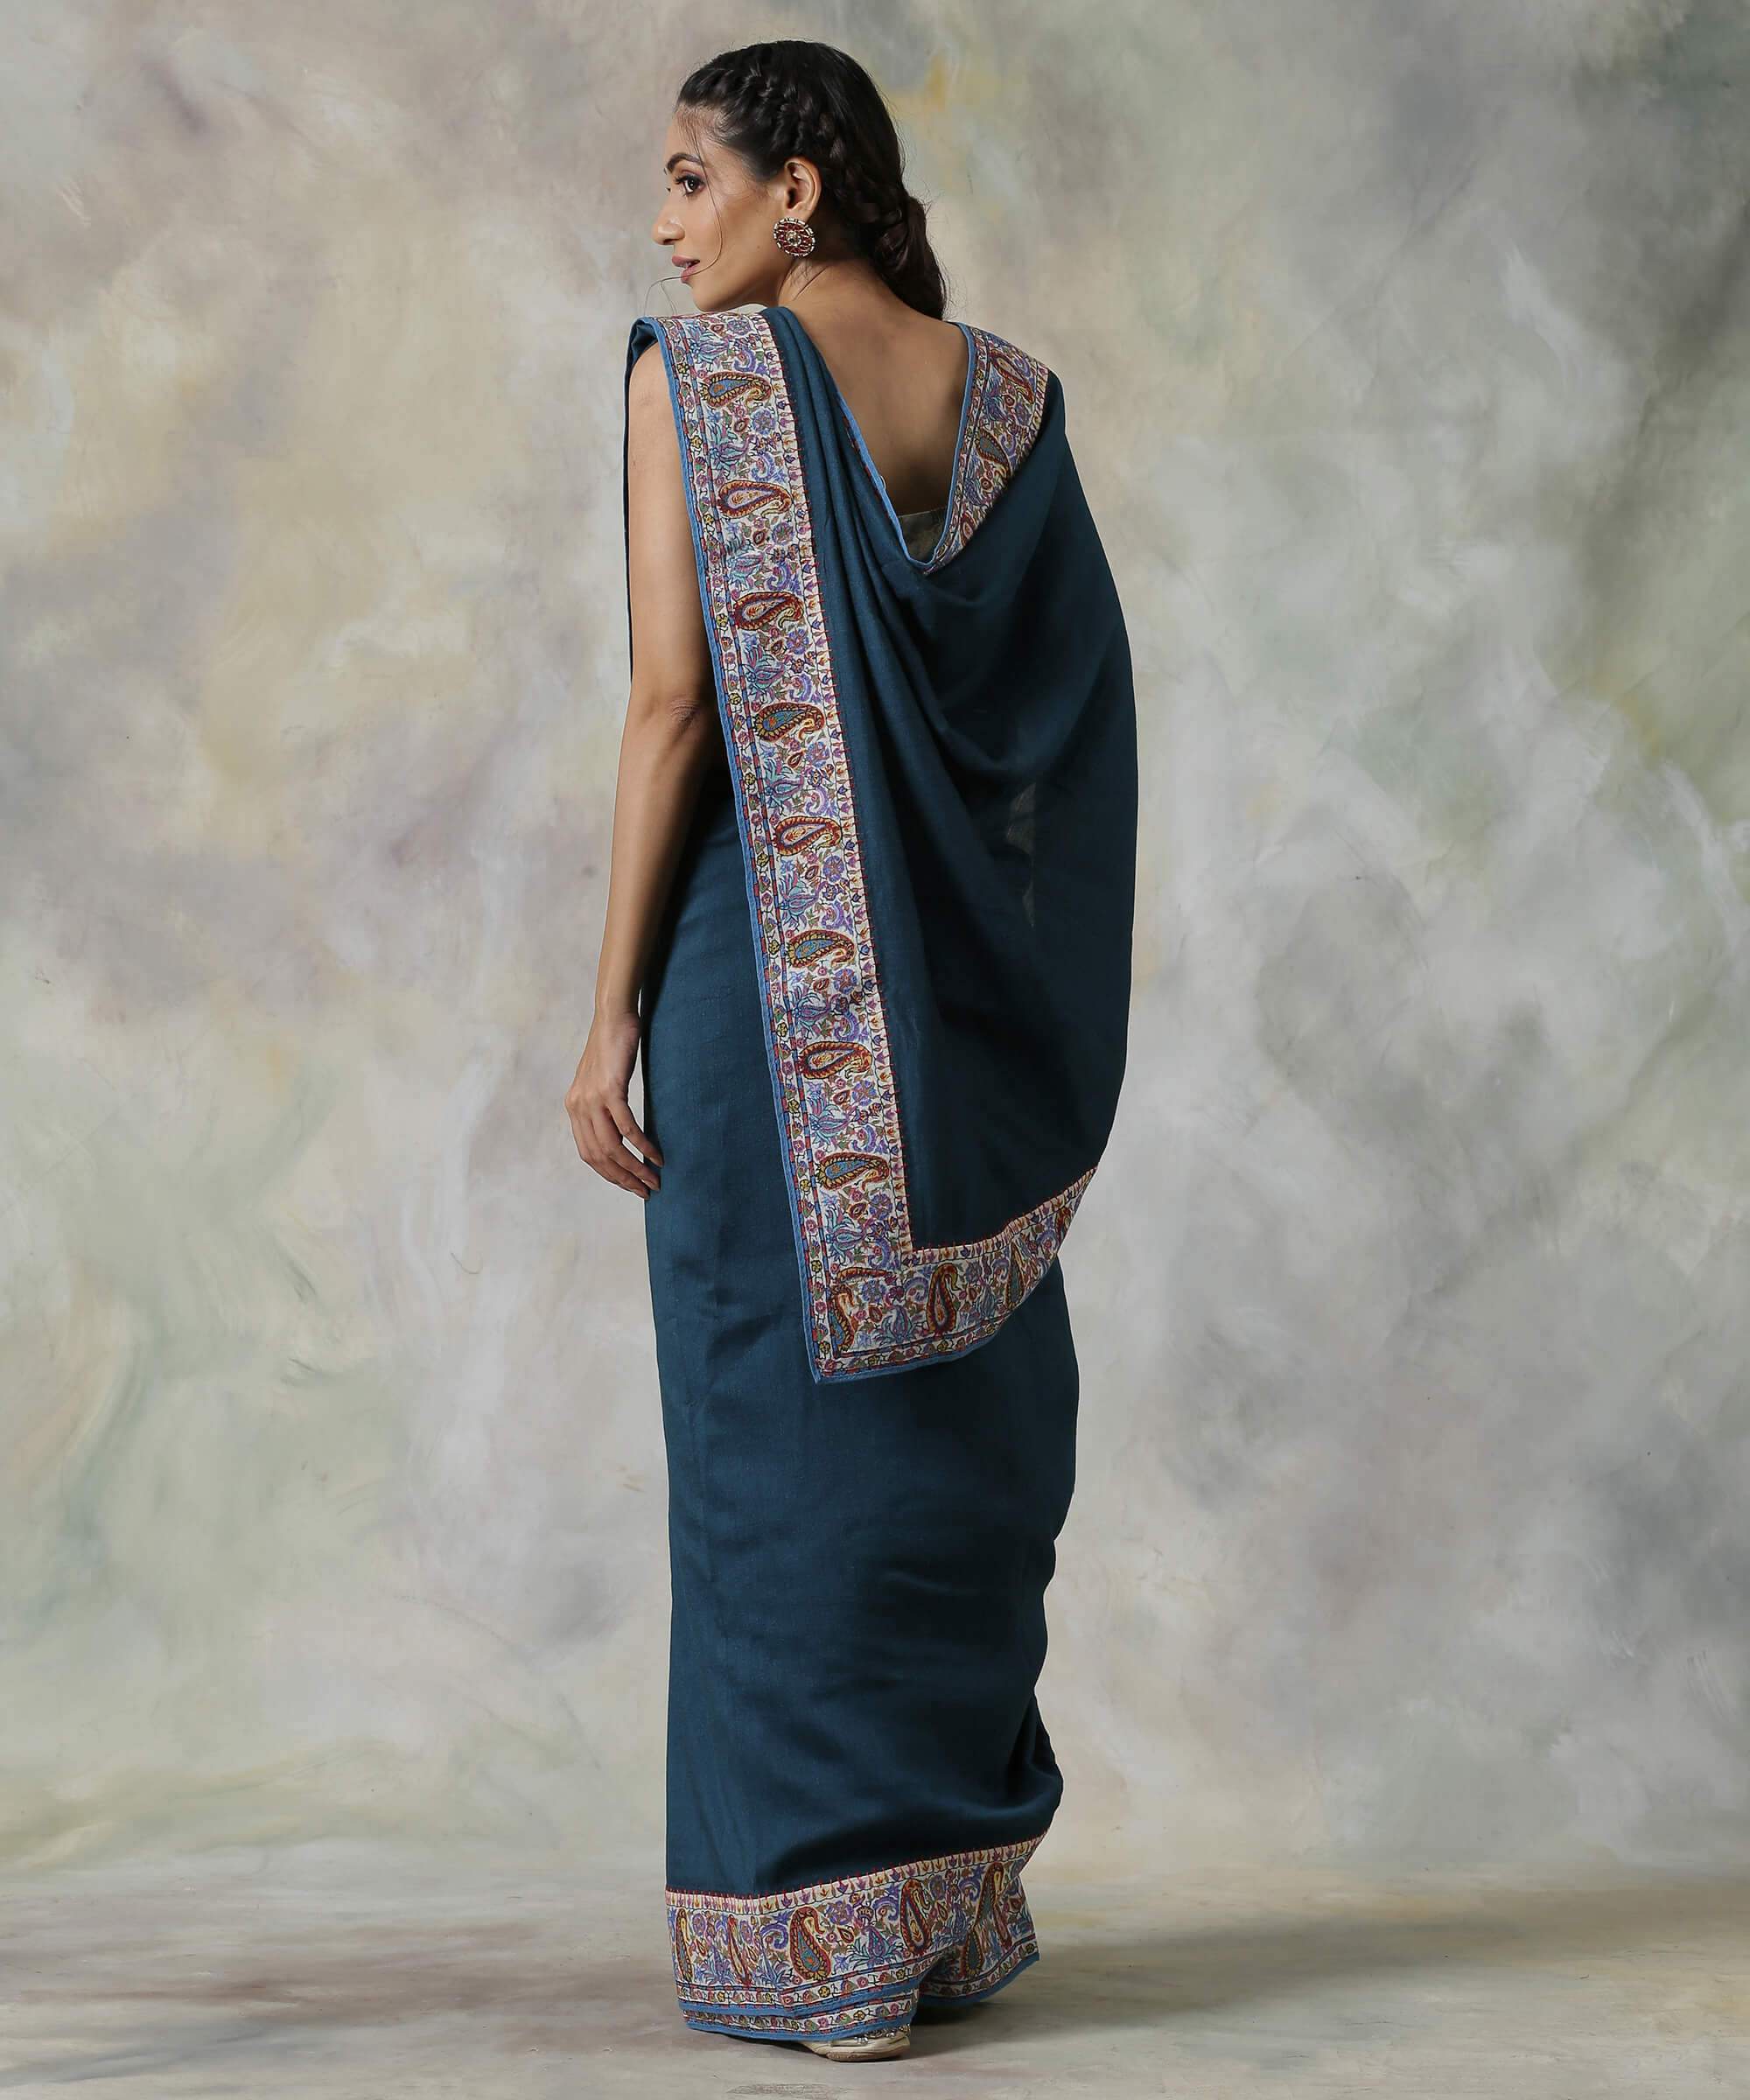 Handwoven_Moonga_Silk_Saree_in_Regal_Blue_with_Hand_Appliqued_Sozni_Needle_Work_Border_WeaverStory_03